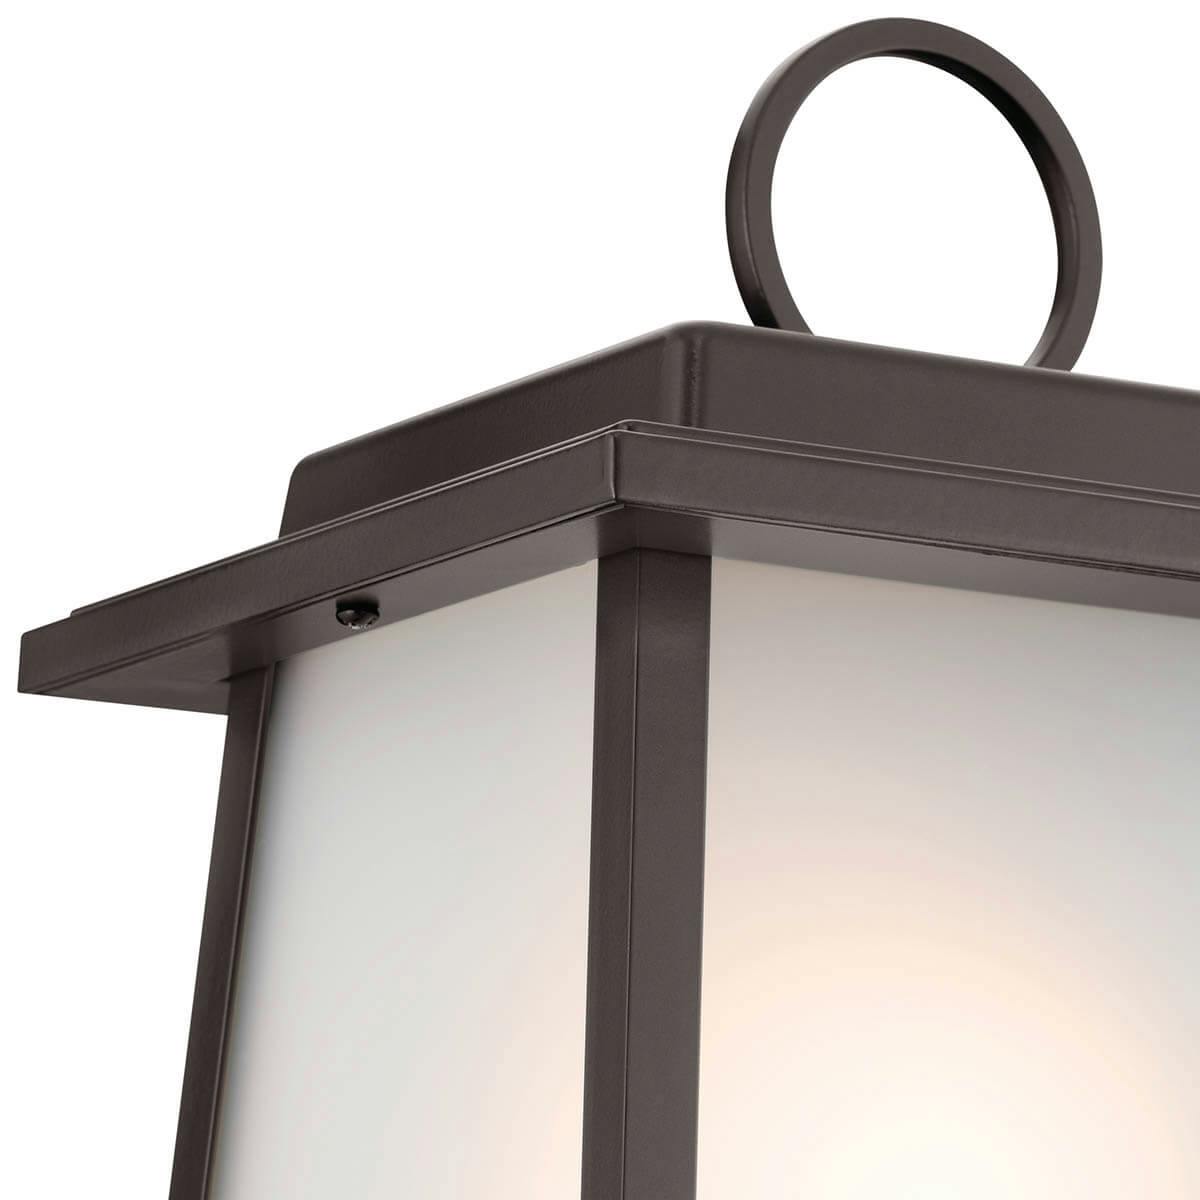 Close up view of the Noward 7.5" Post Lantern Olde Bronze on a white background